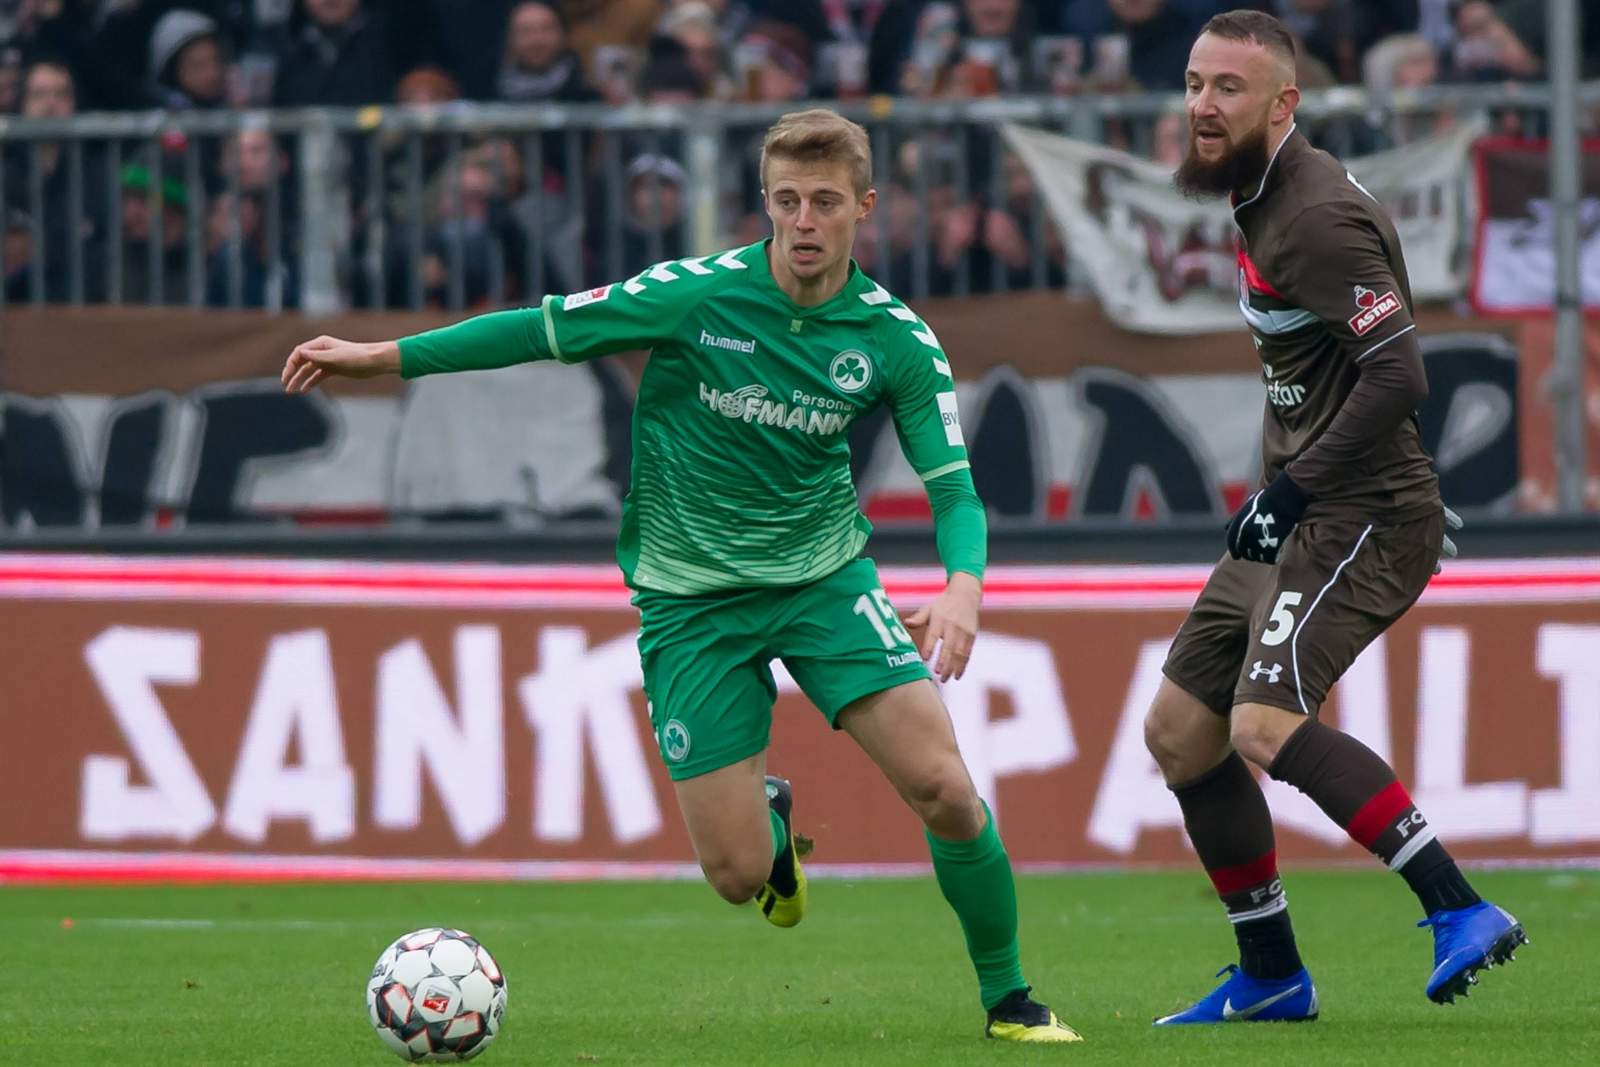 soi-keo-darmstadt-greuther-furth-luc-23h30-ngay-29-5-2020-2